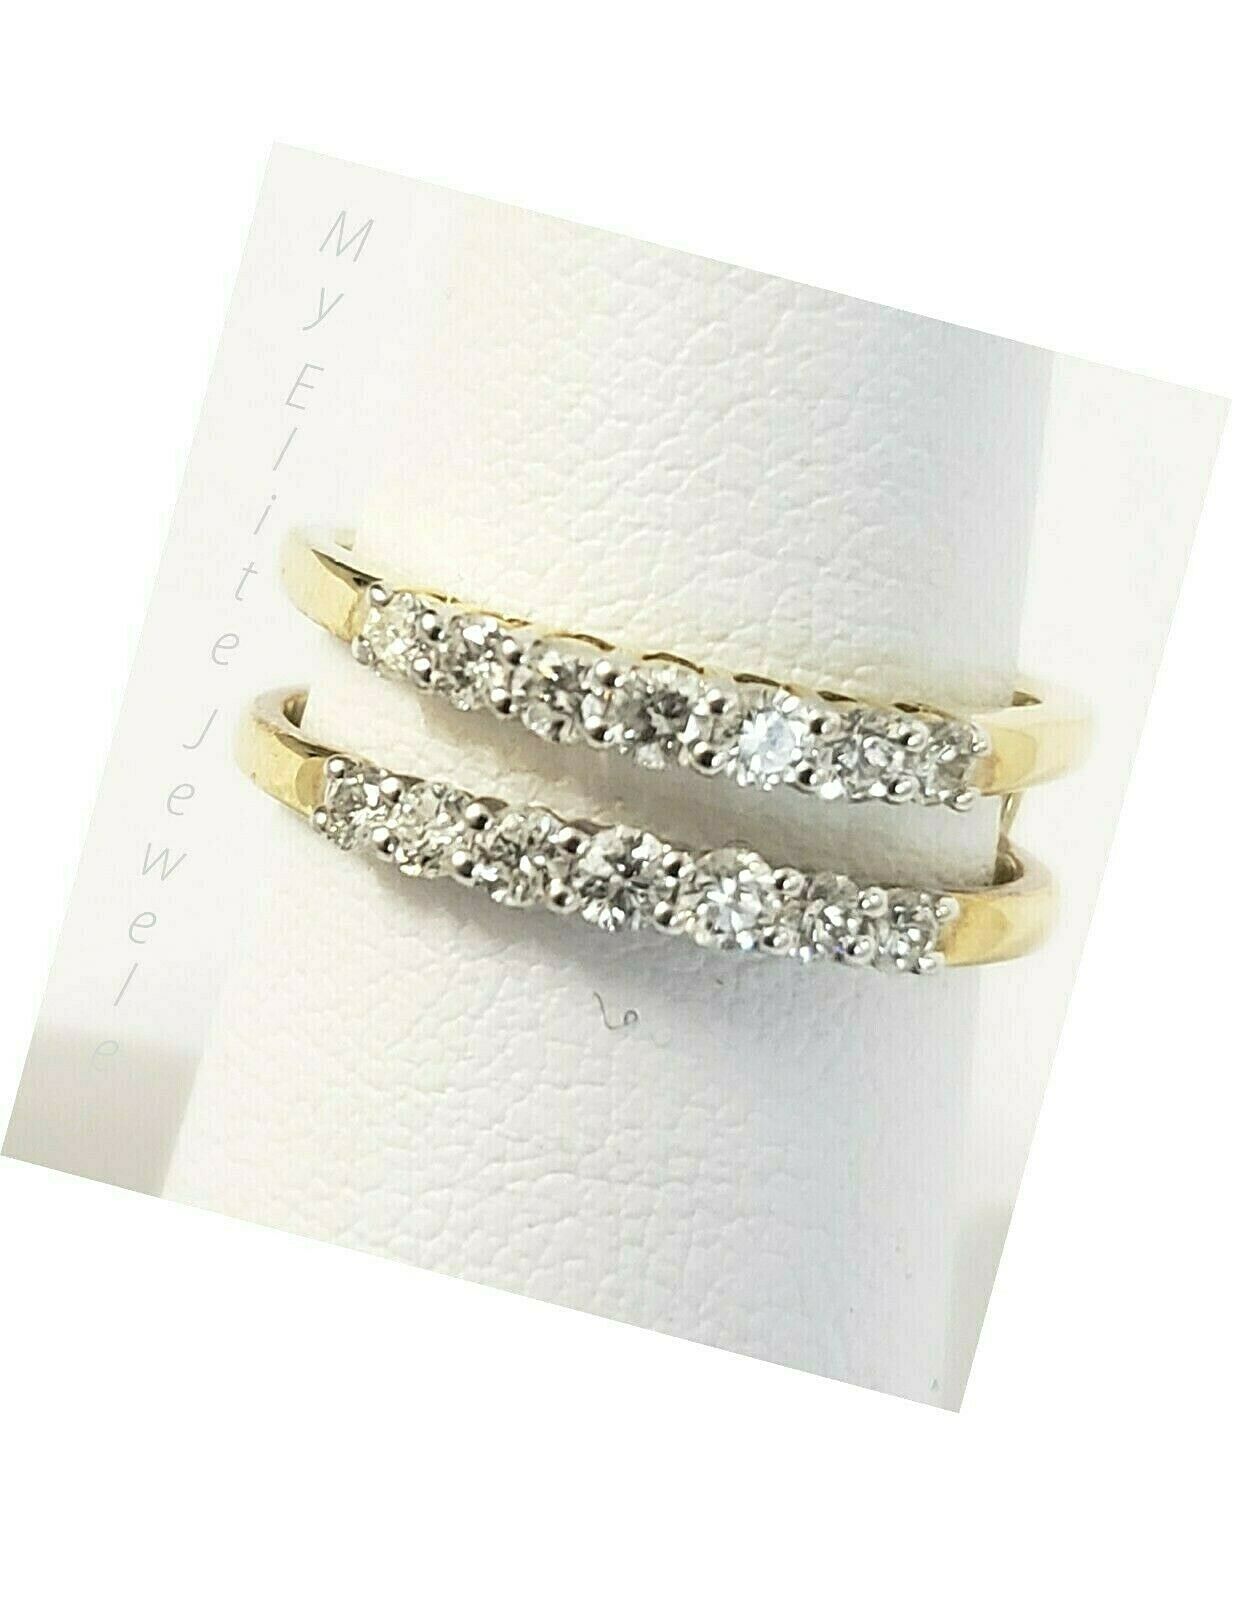 Real 14K Gold 1/2CT Diamond Ladies Ring Solitaire Guard Wrap Band Size7 Enhancer